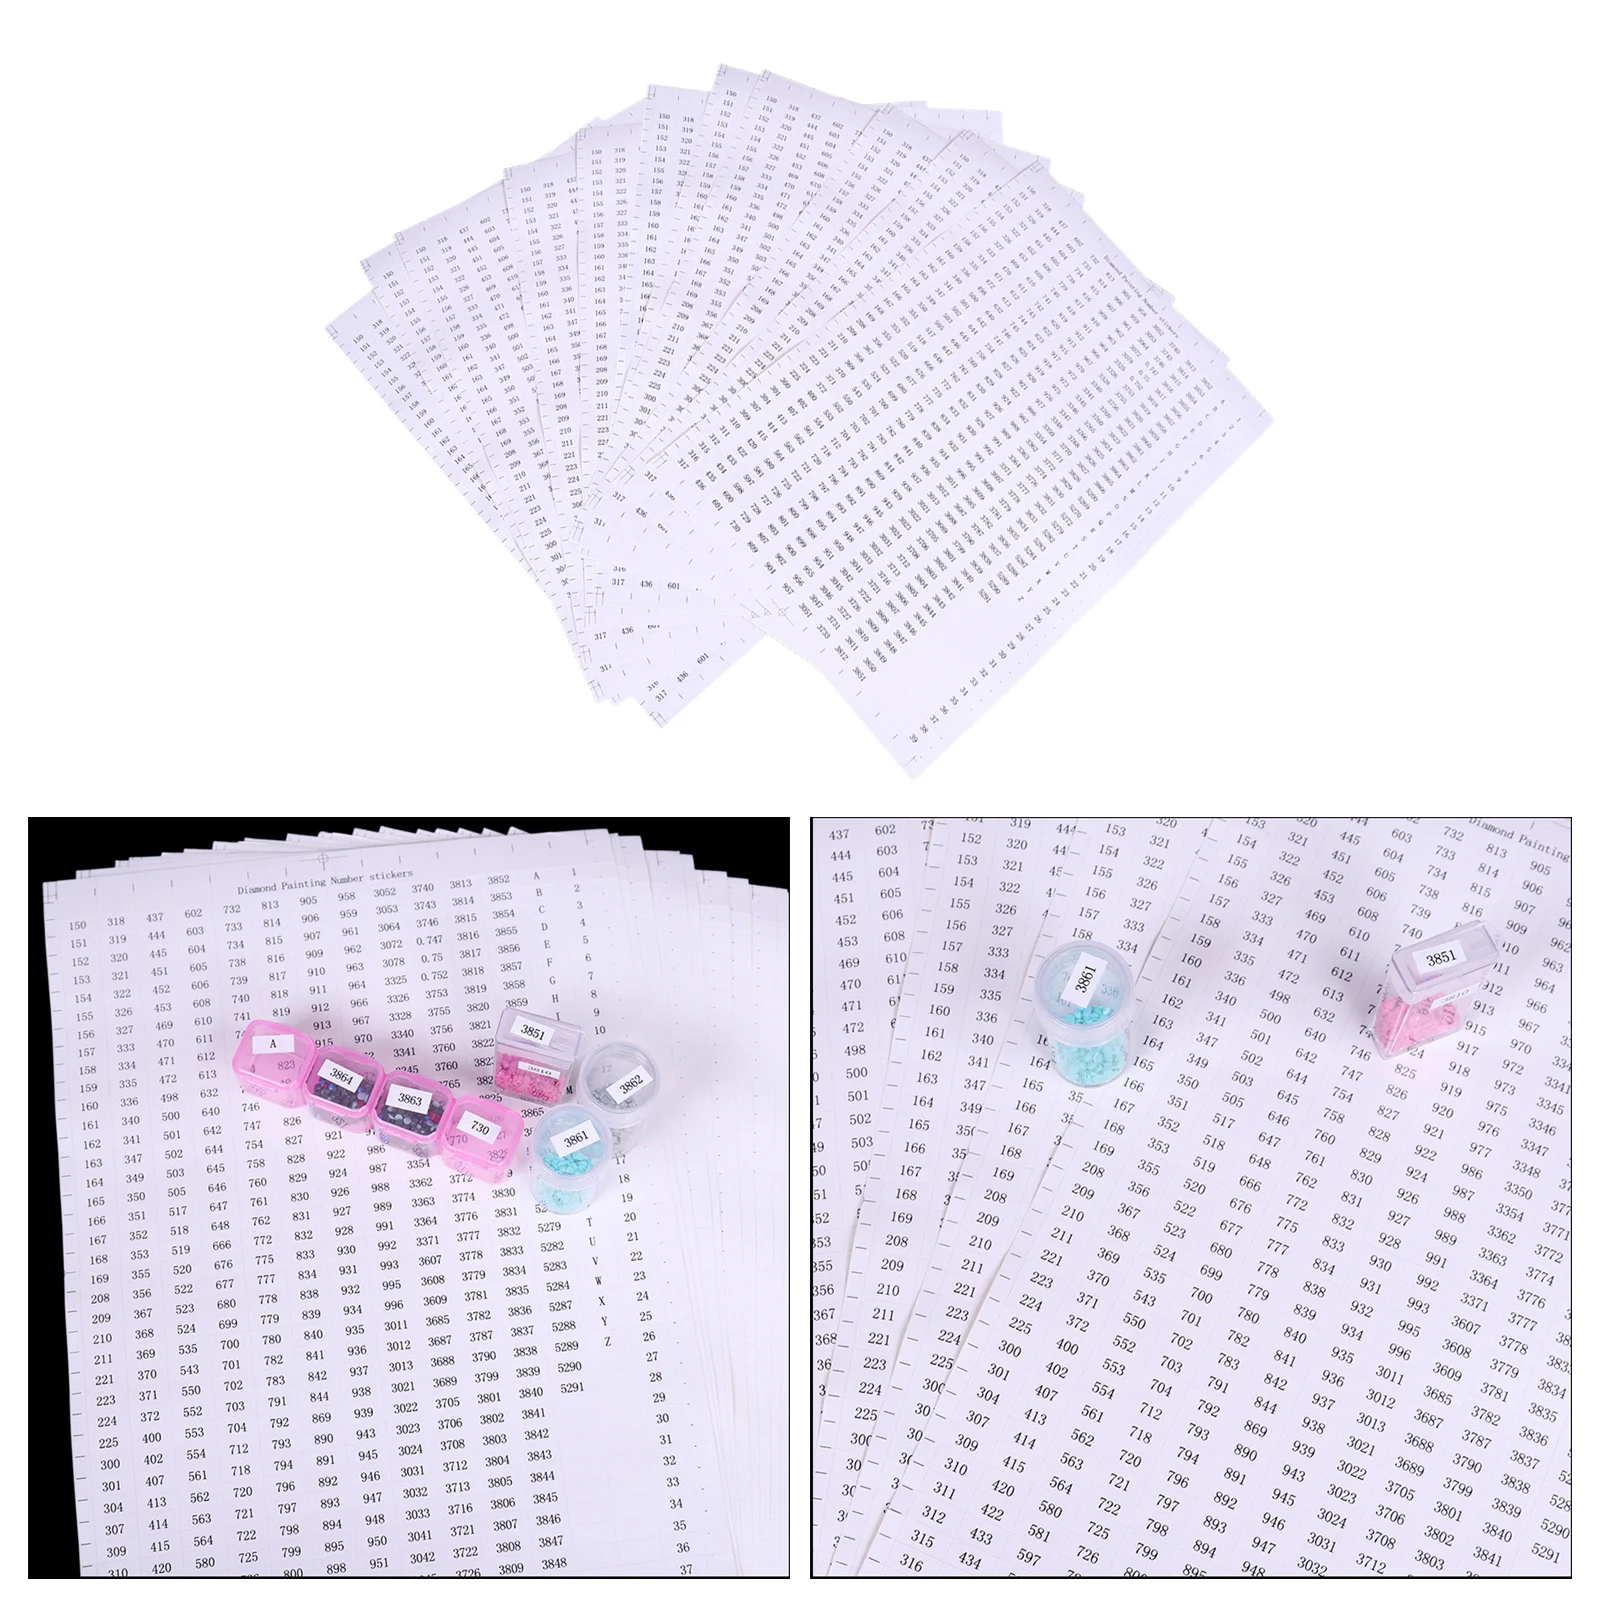 Square Sticker Paper by Number with Handwriting Label Thread Embroidery Cross Stitch Floss Thread Tool Accessory Labels Supplies